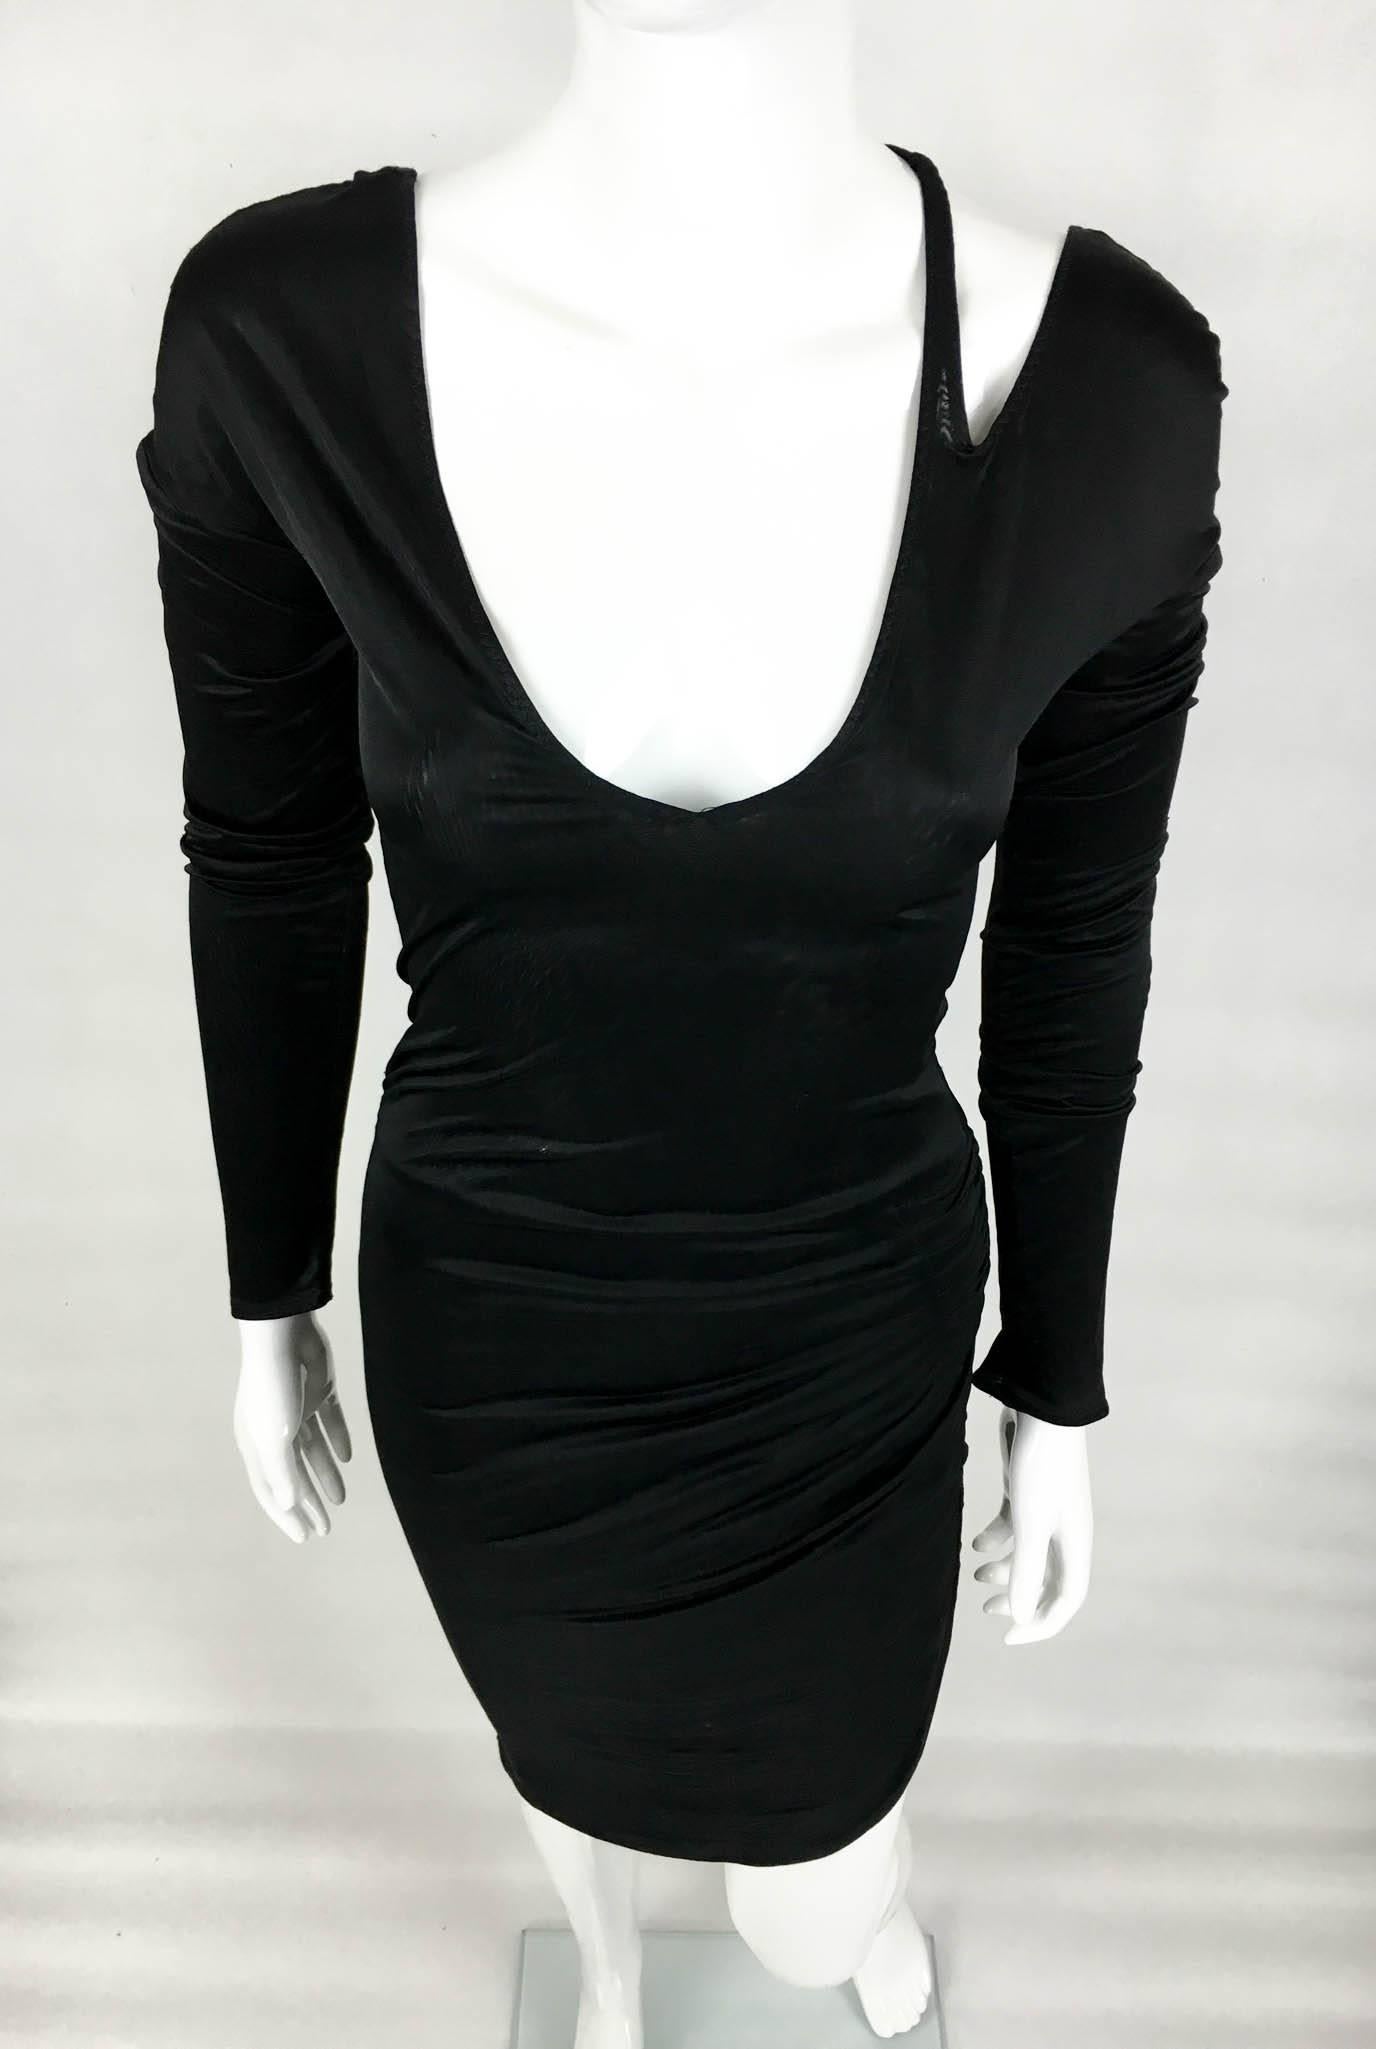 Gucci by Tom Ford Asymmetrical Figure-Hugging Black Dress - 1990s In Good Condition In London, Chelsea